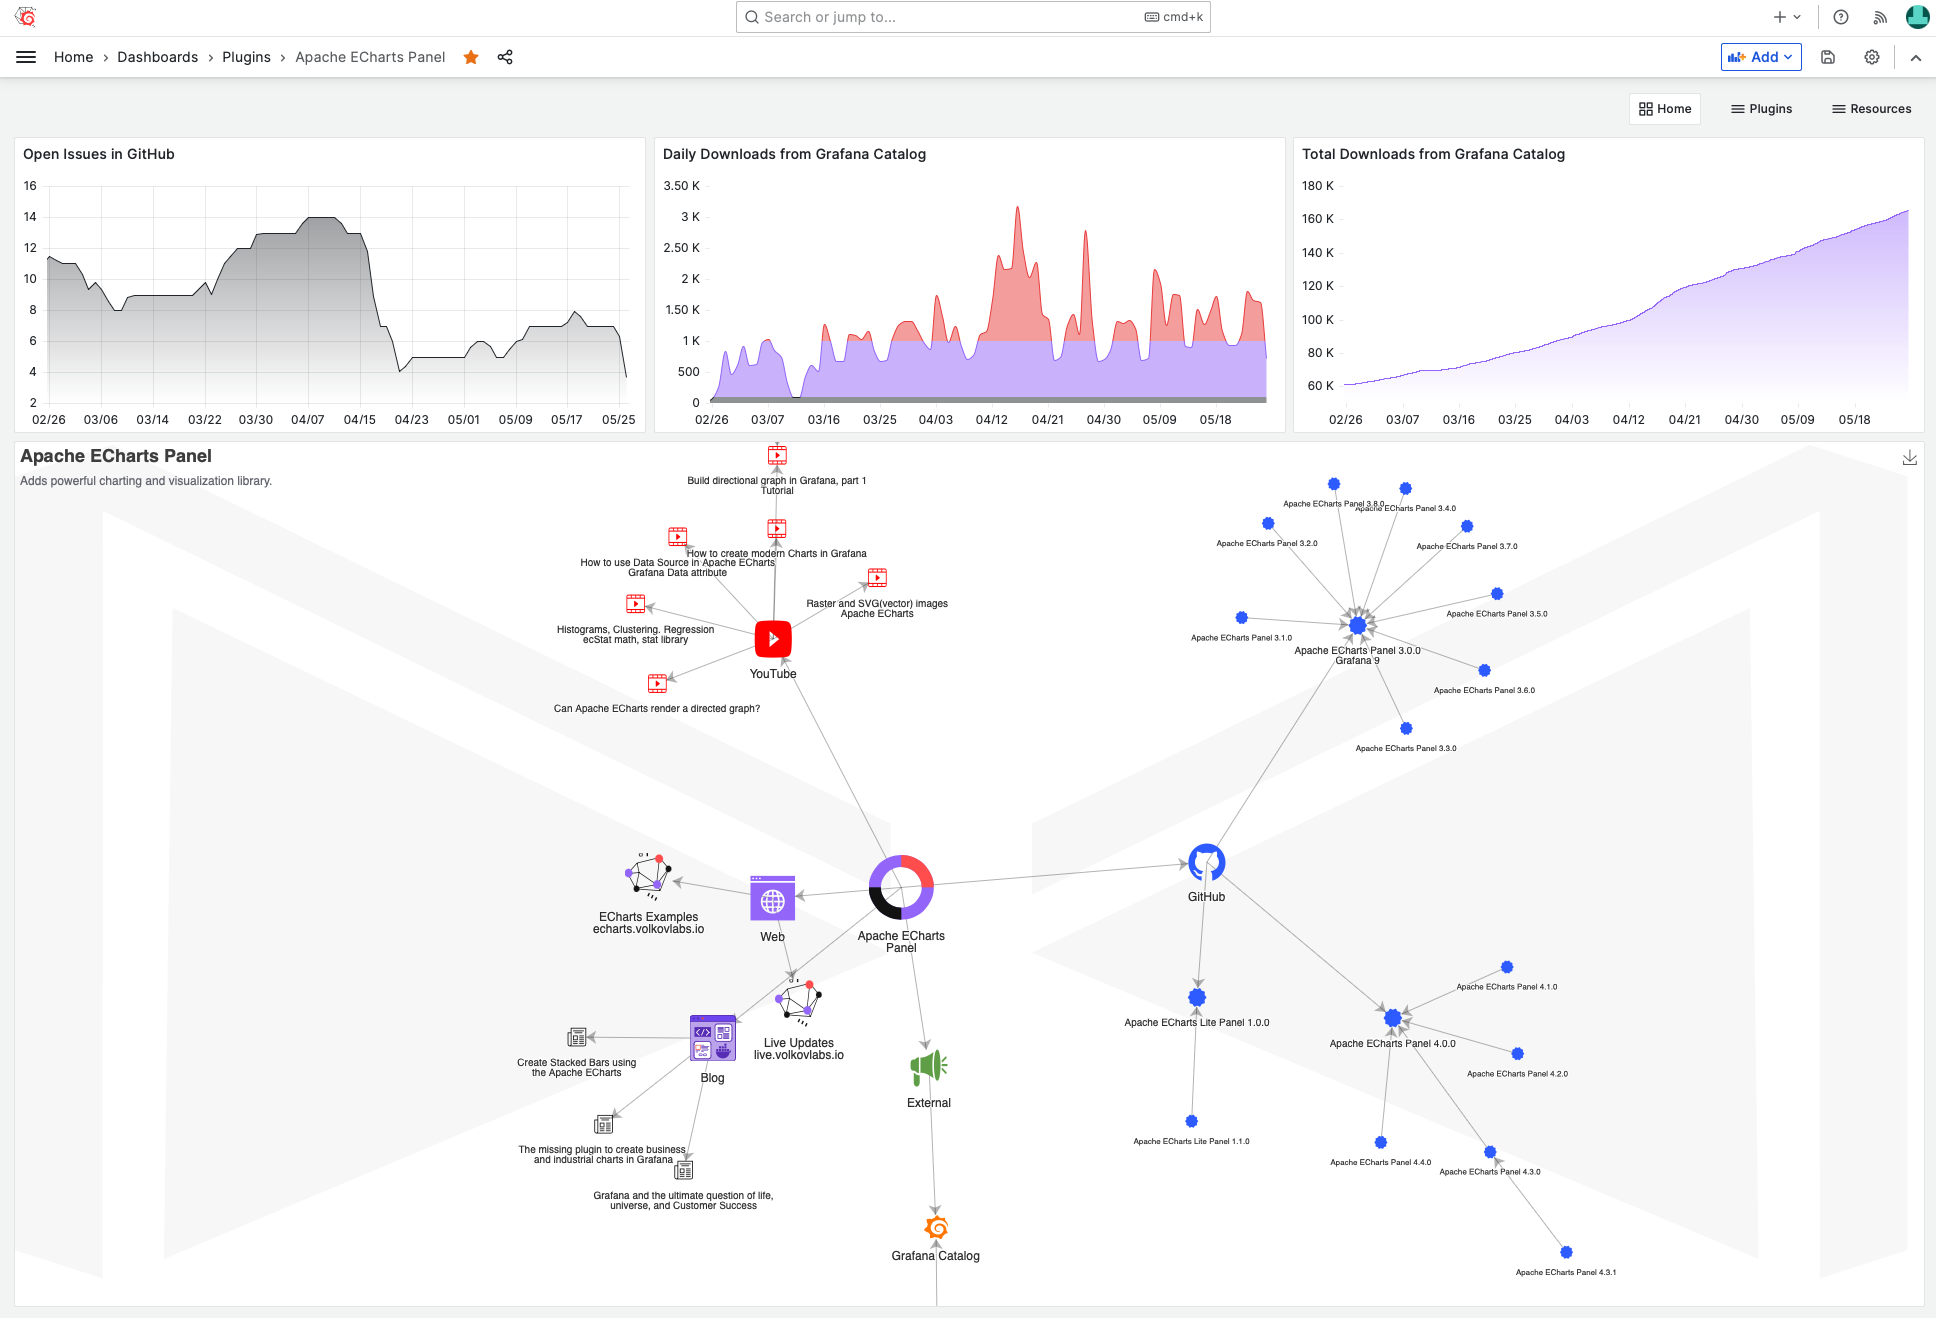 Live Dashboard for the Apache ECharts panel resources.